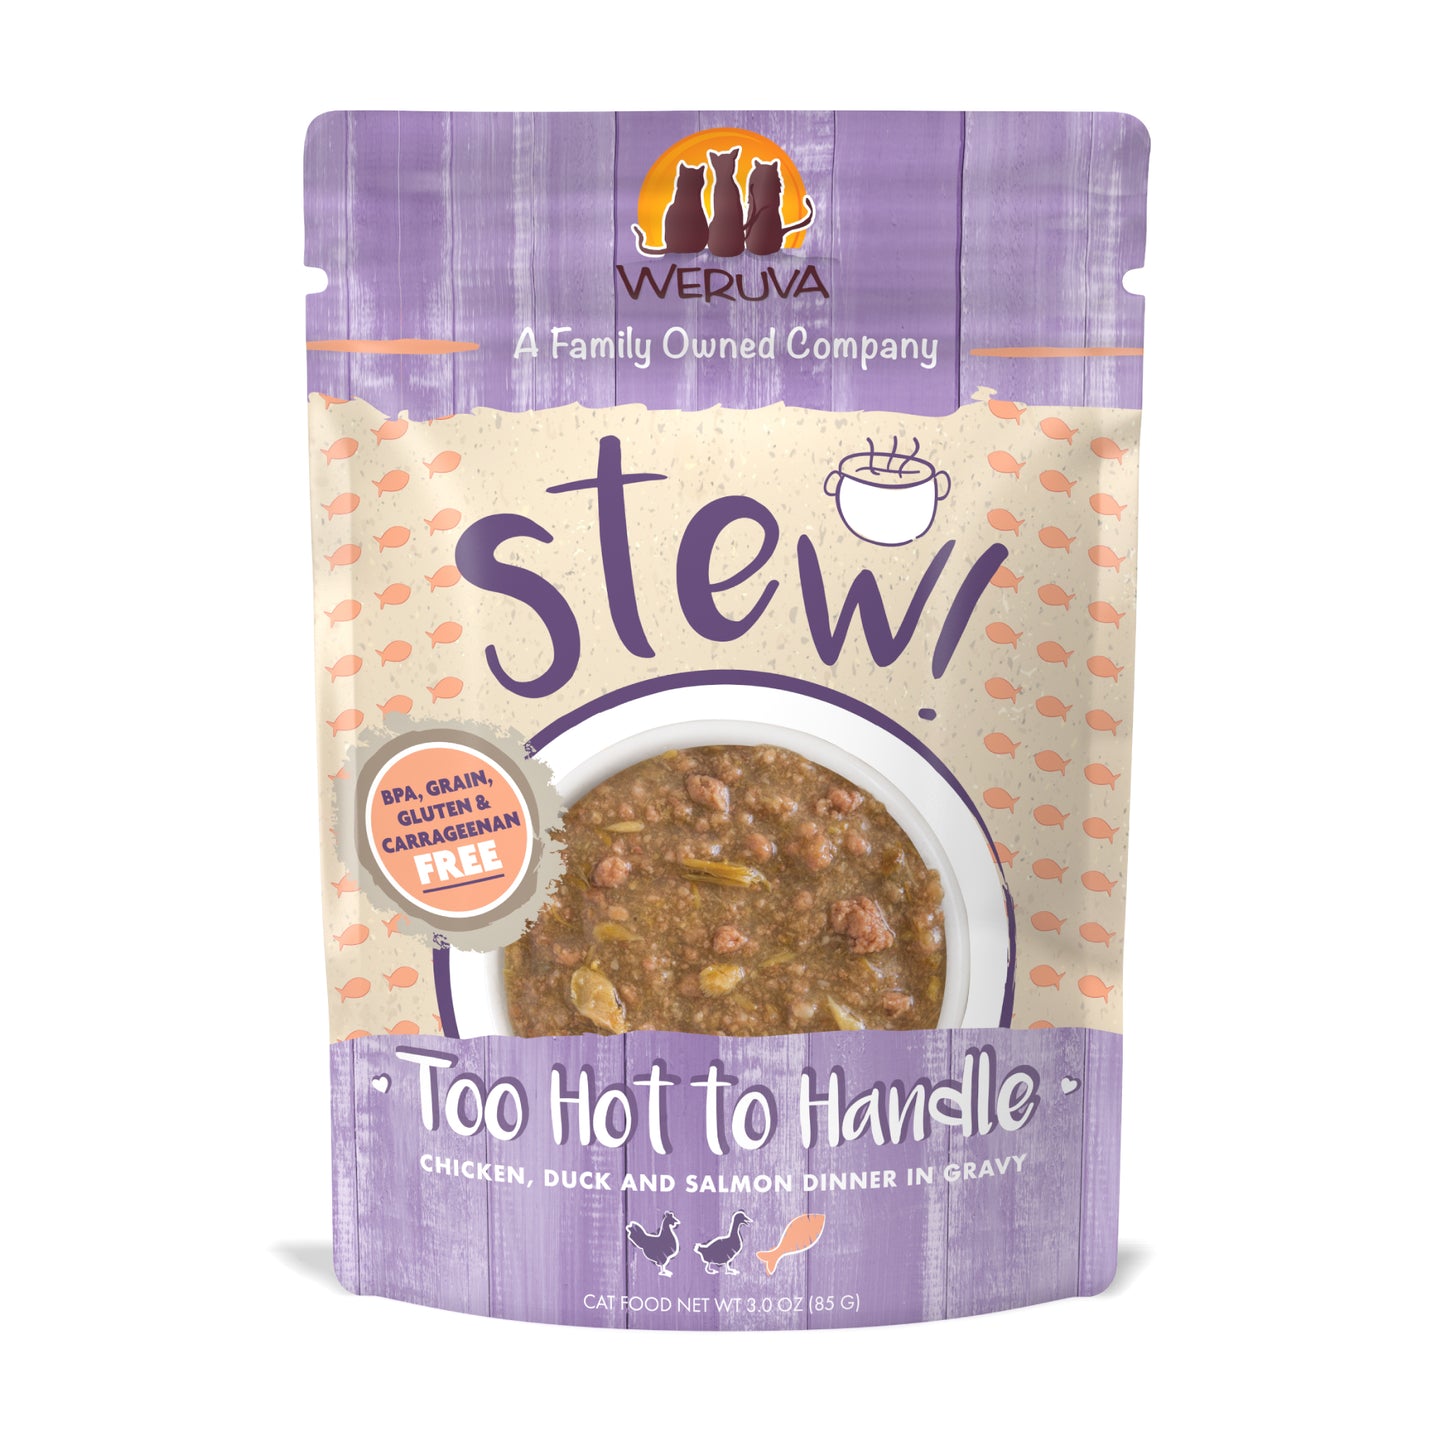 Weruva Stew 3oz Pouch Cat food Too Hot to Handle Chicken, Duck and Salmon